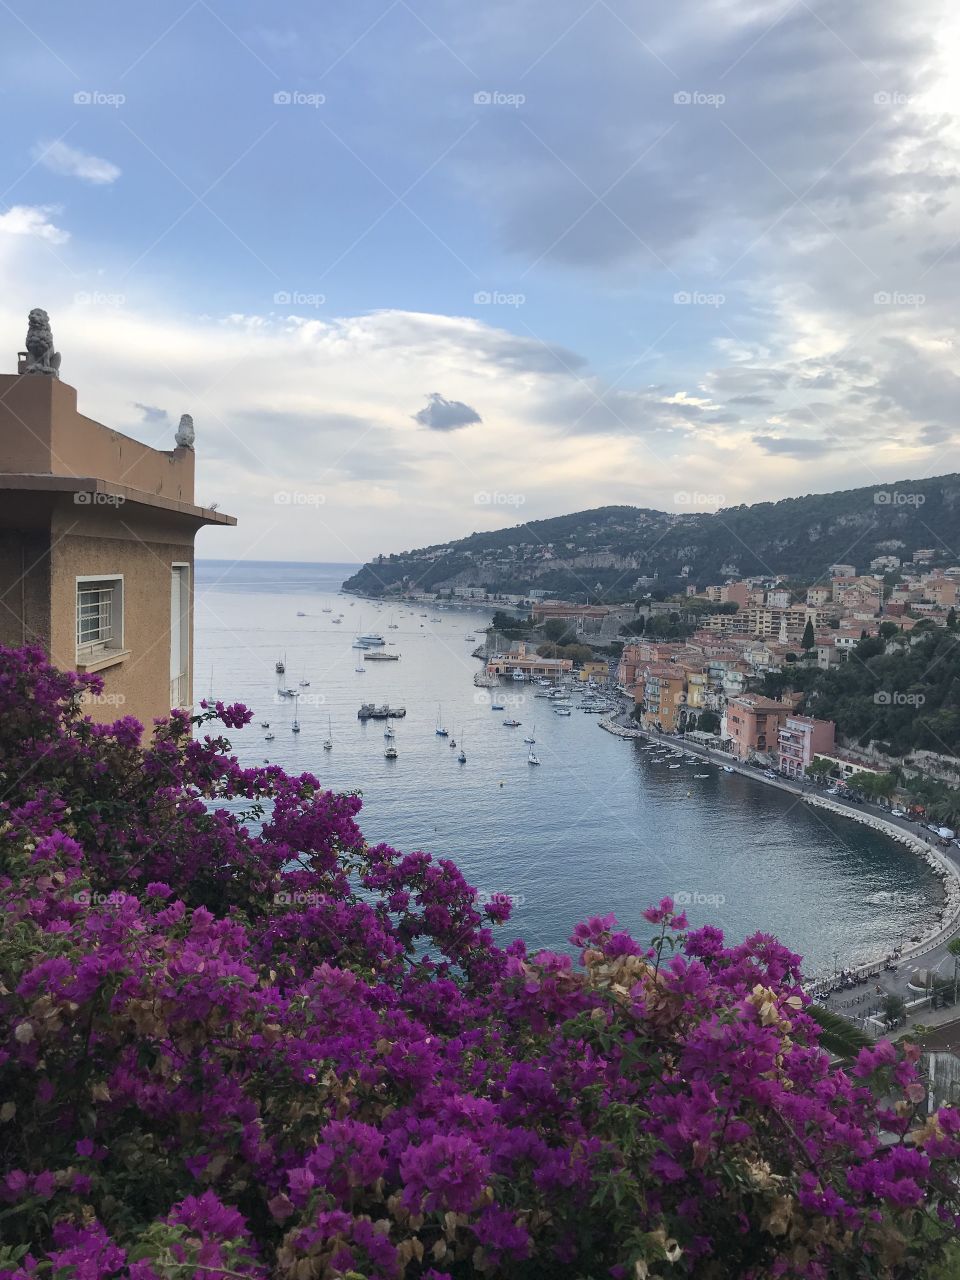 French riviera landscape with sea, boat, and pink flower